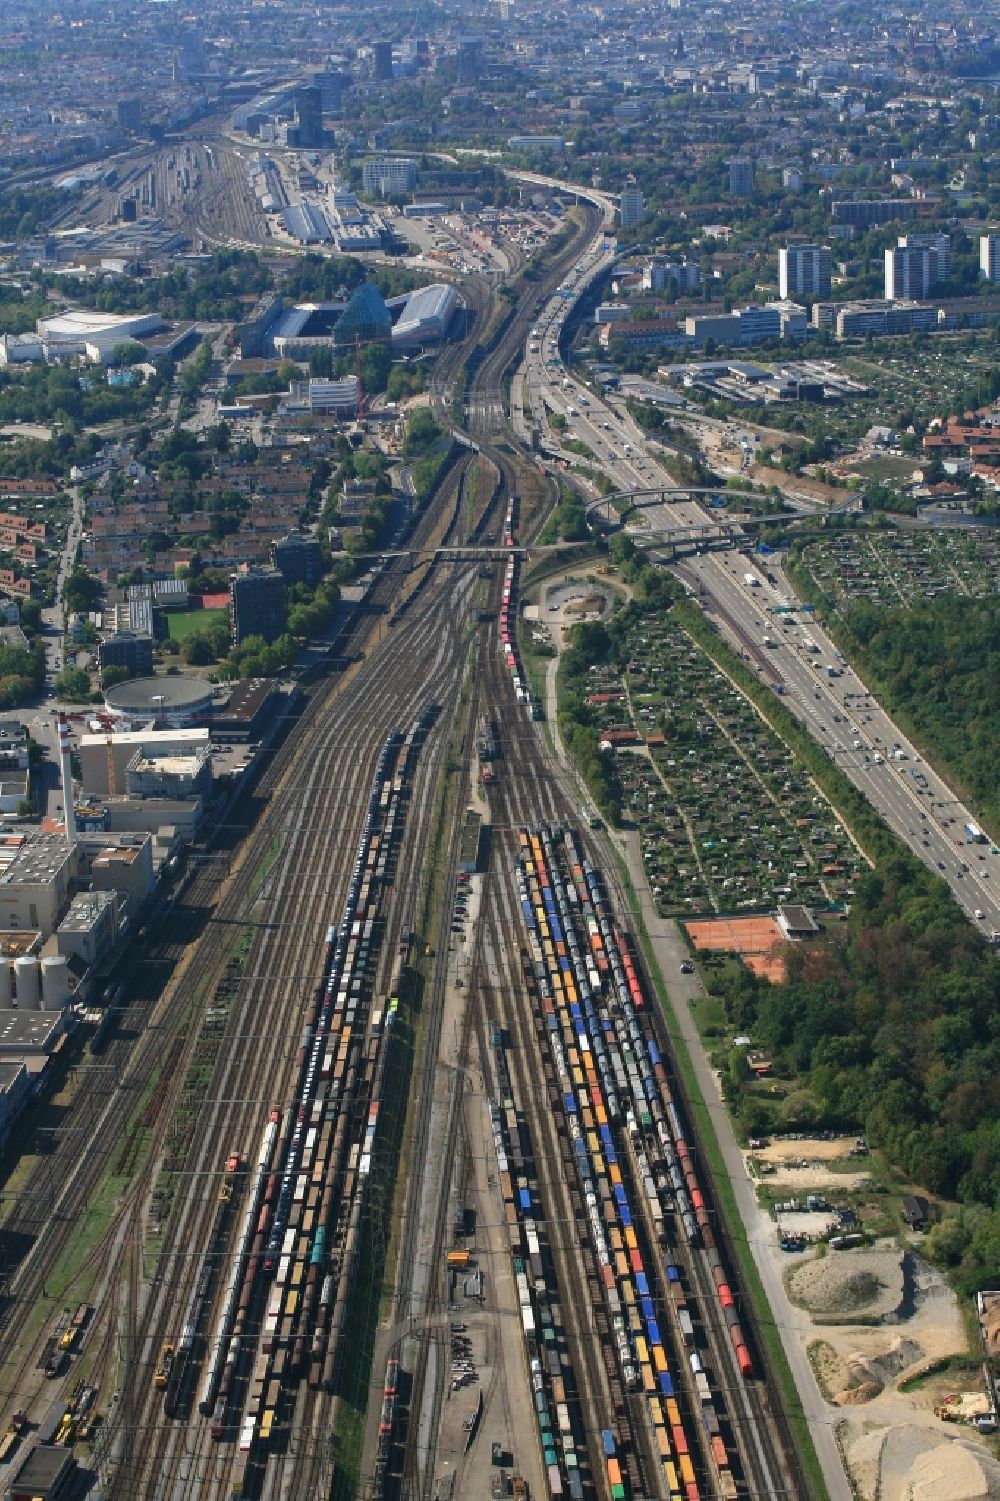 Muttenz from above - Railway tracks and cargo trains in the route network of the Swiss Railway SBB in Muttenz in the canton Basel-Landschaft, Switzerland